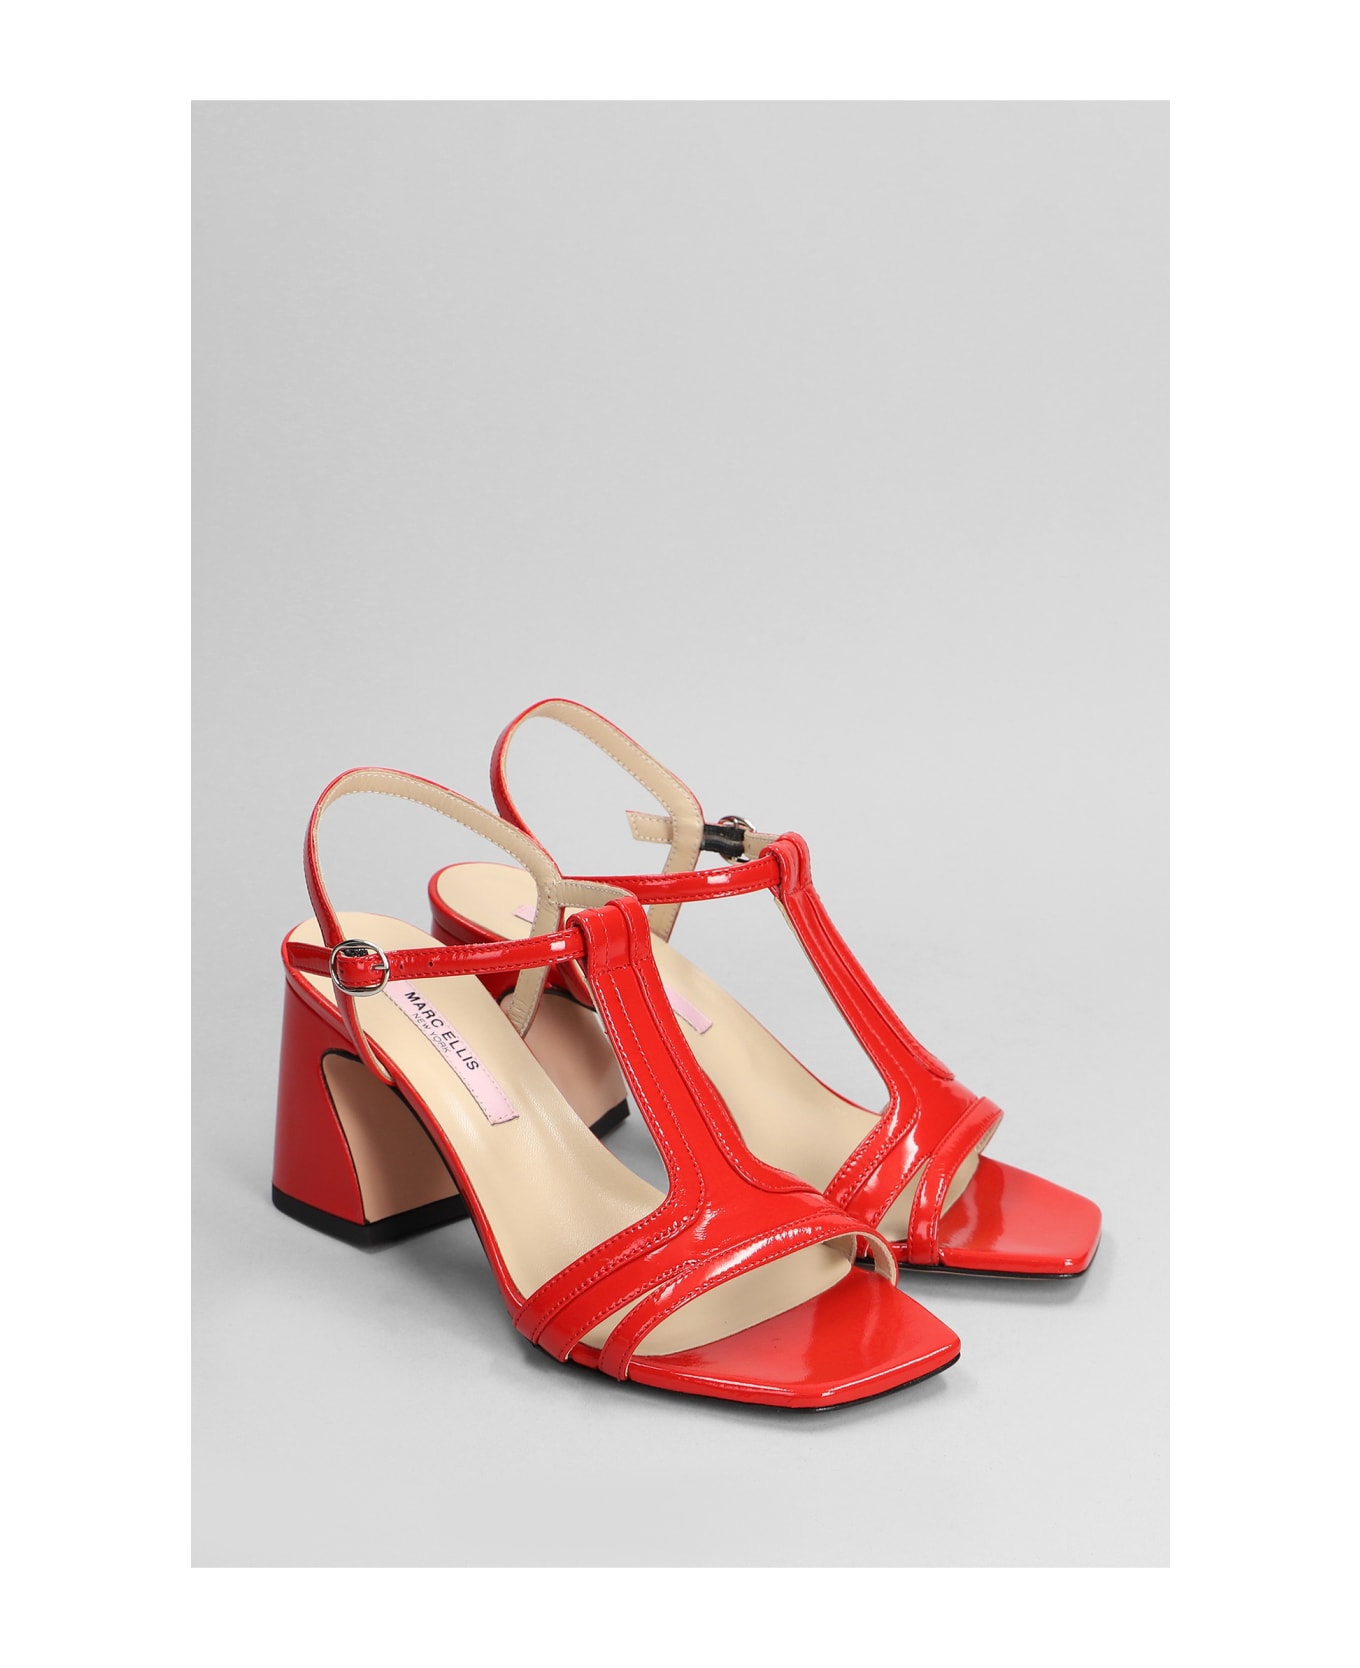 Marc Ellis Sandals In Red Leather - red サンダル